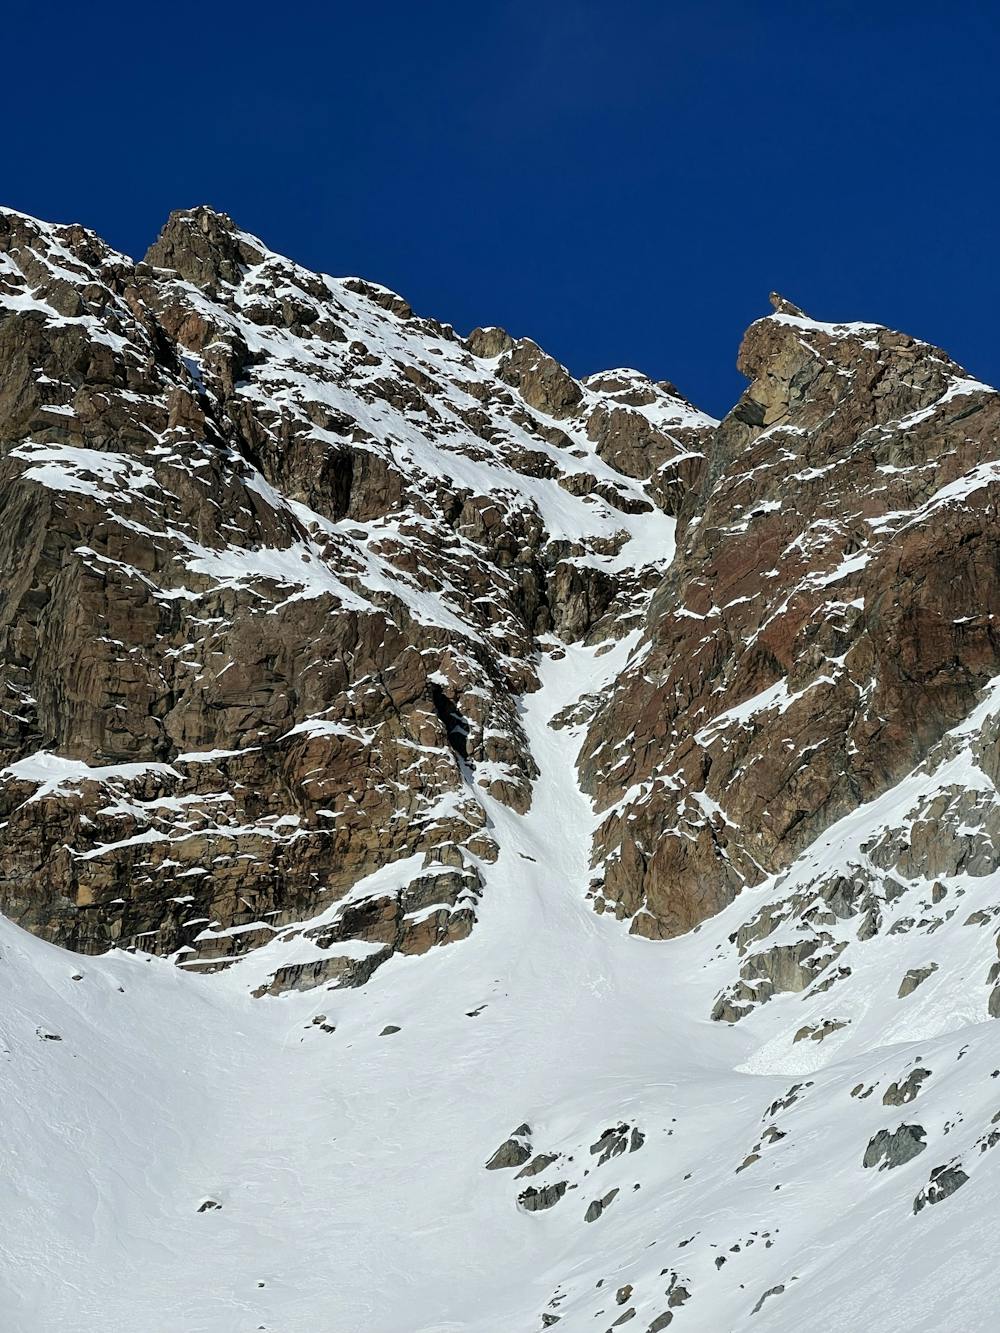 The second and last couloir to get to the top